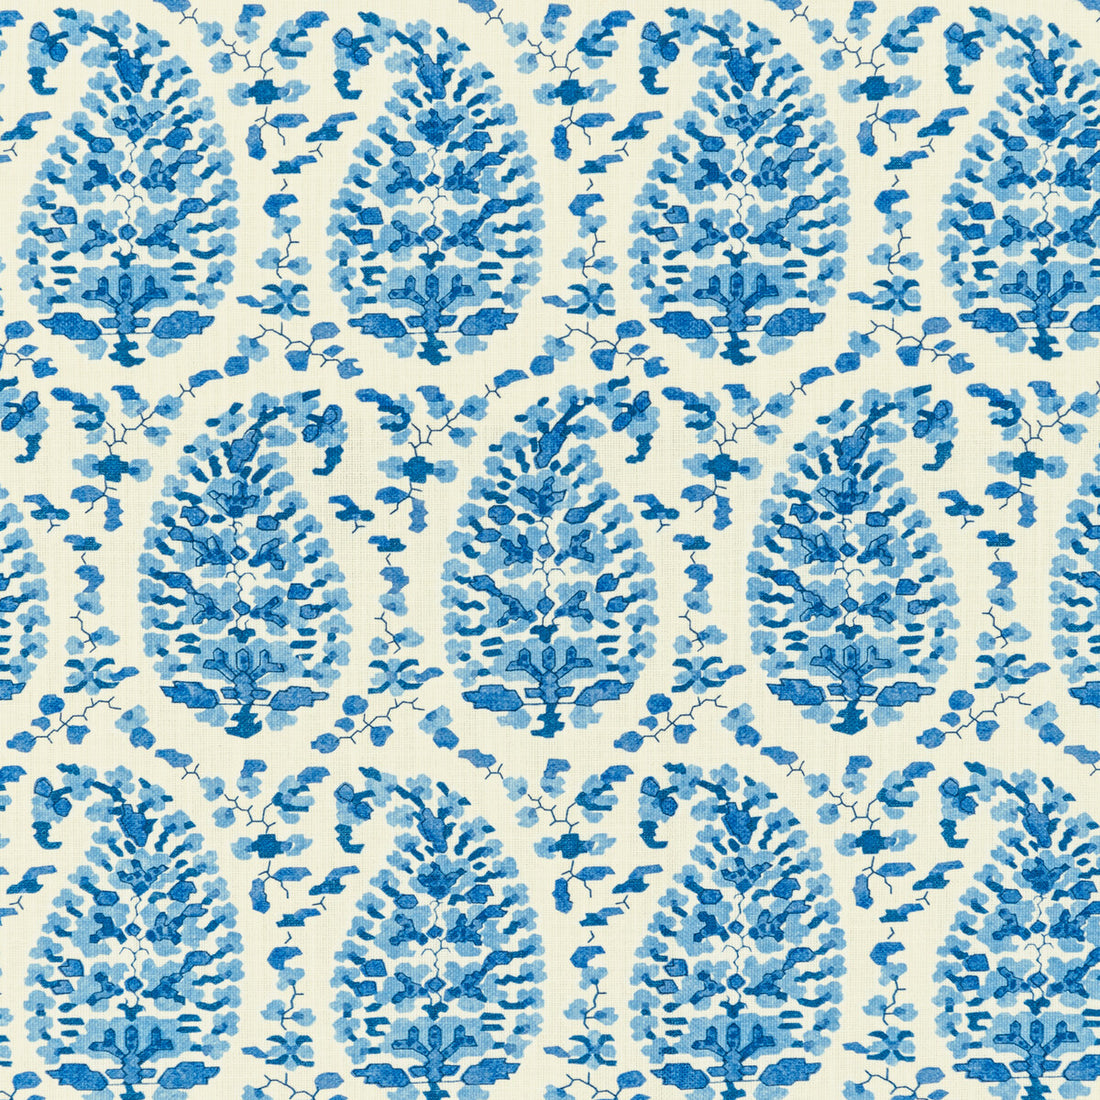 Rougier Print fabric in blue color - pattern 8020130.5.0 - by Brunschwig &amp; Fils in the En Vacances II collection